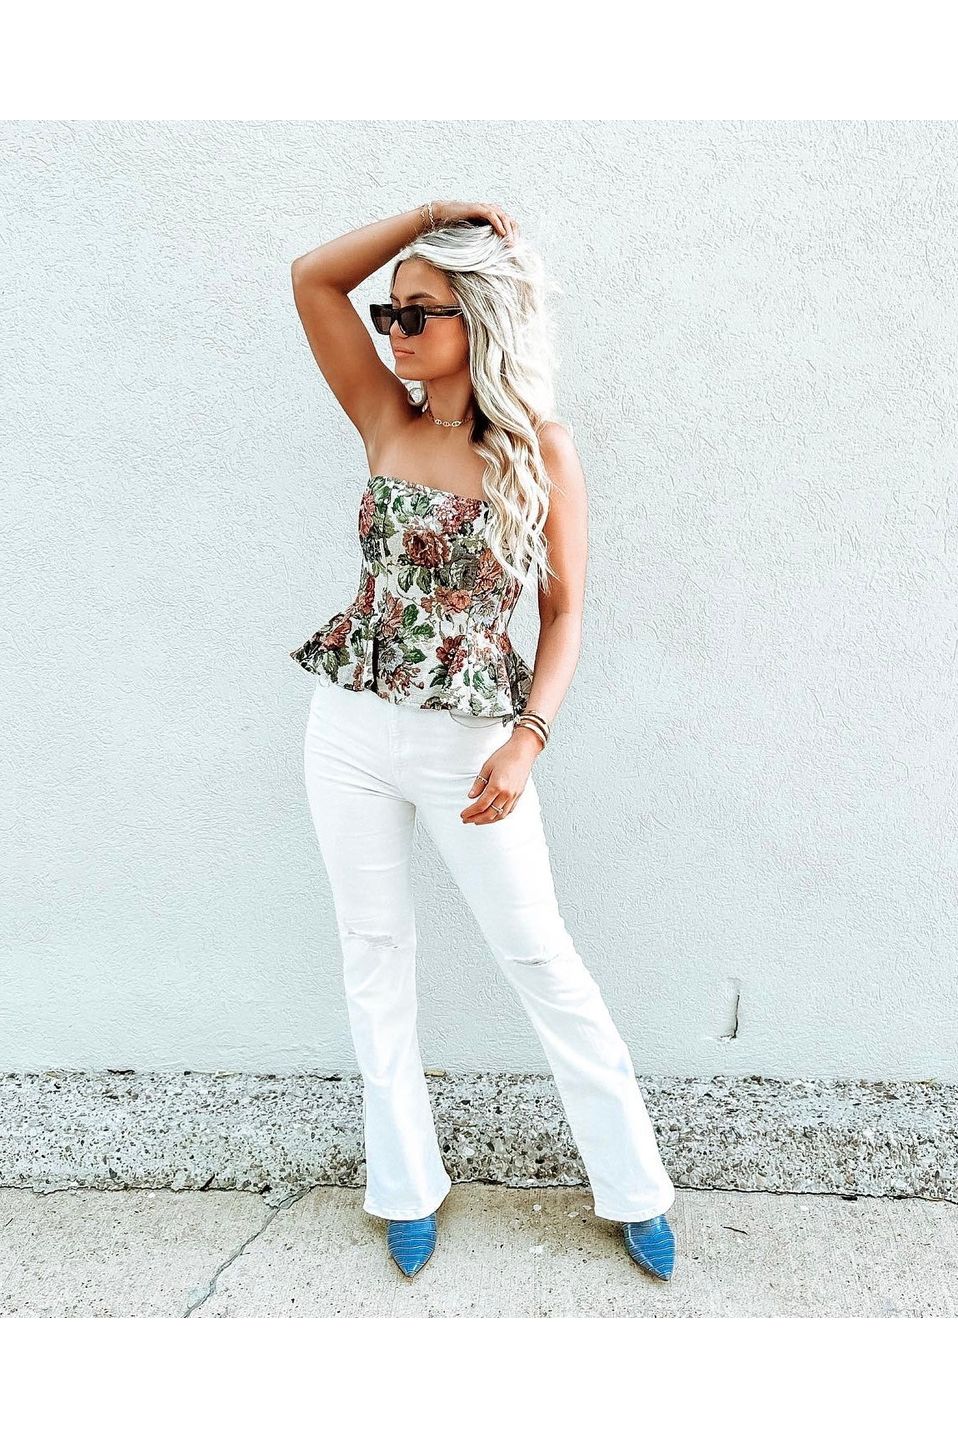 white floral corset top with jeans